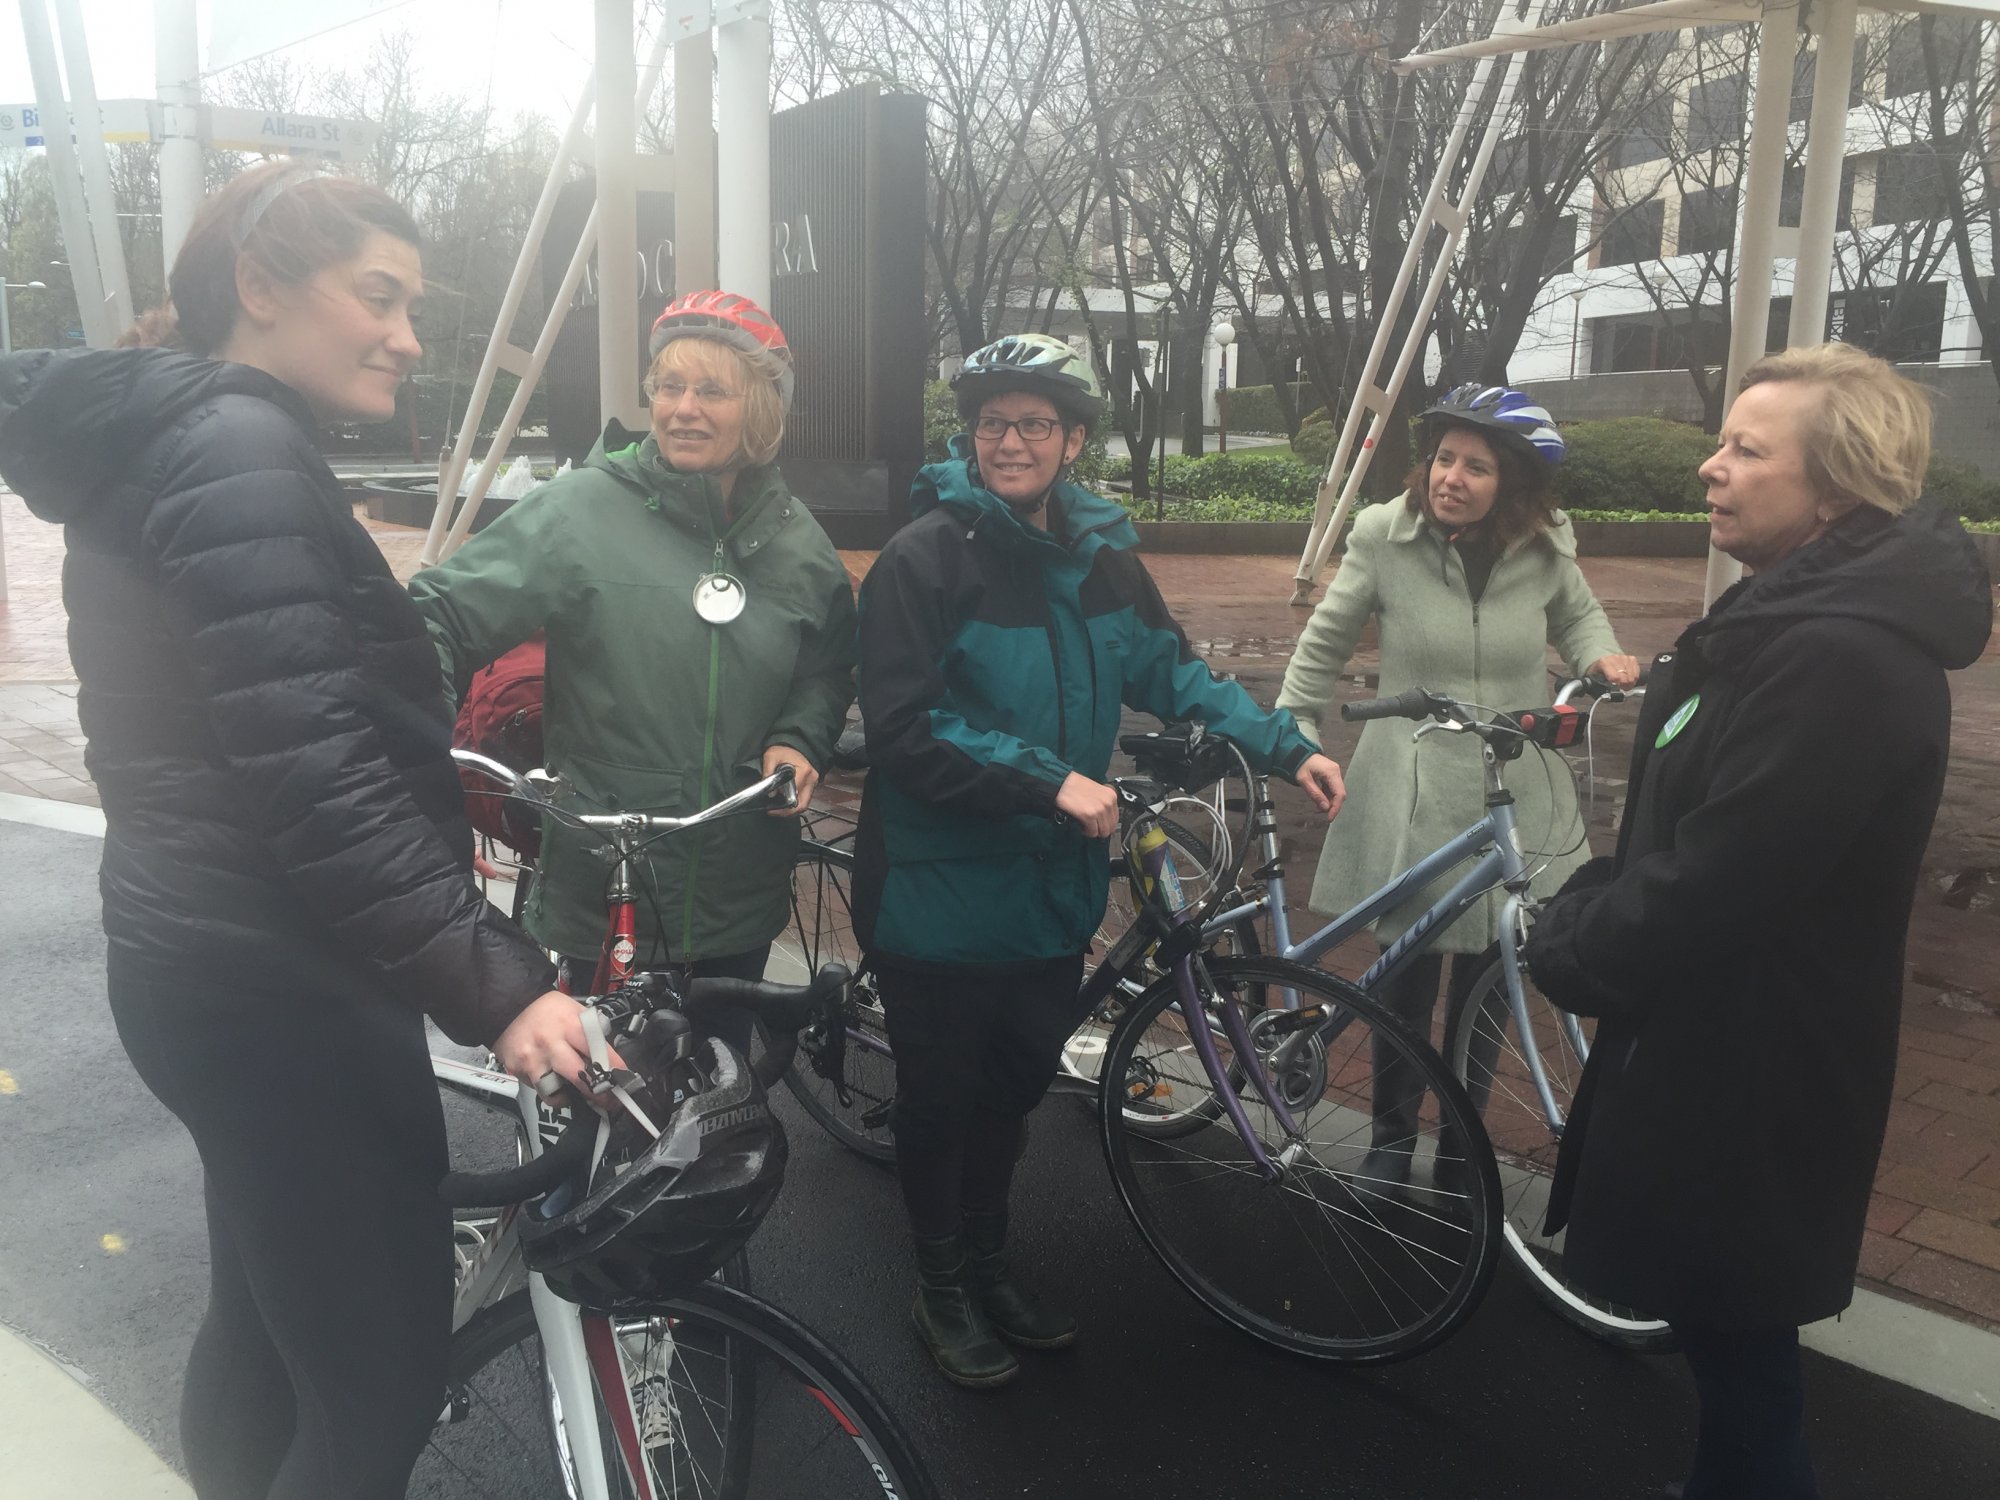 Greens would aim to get more women on bikes